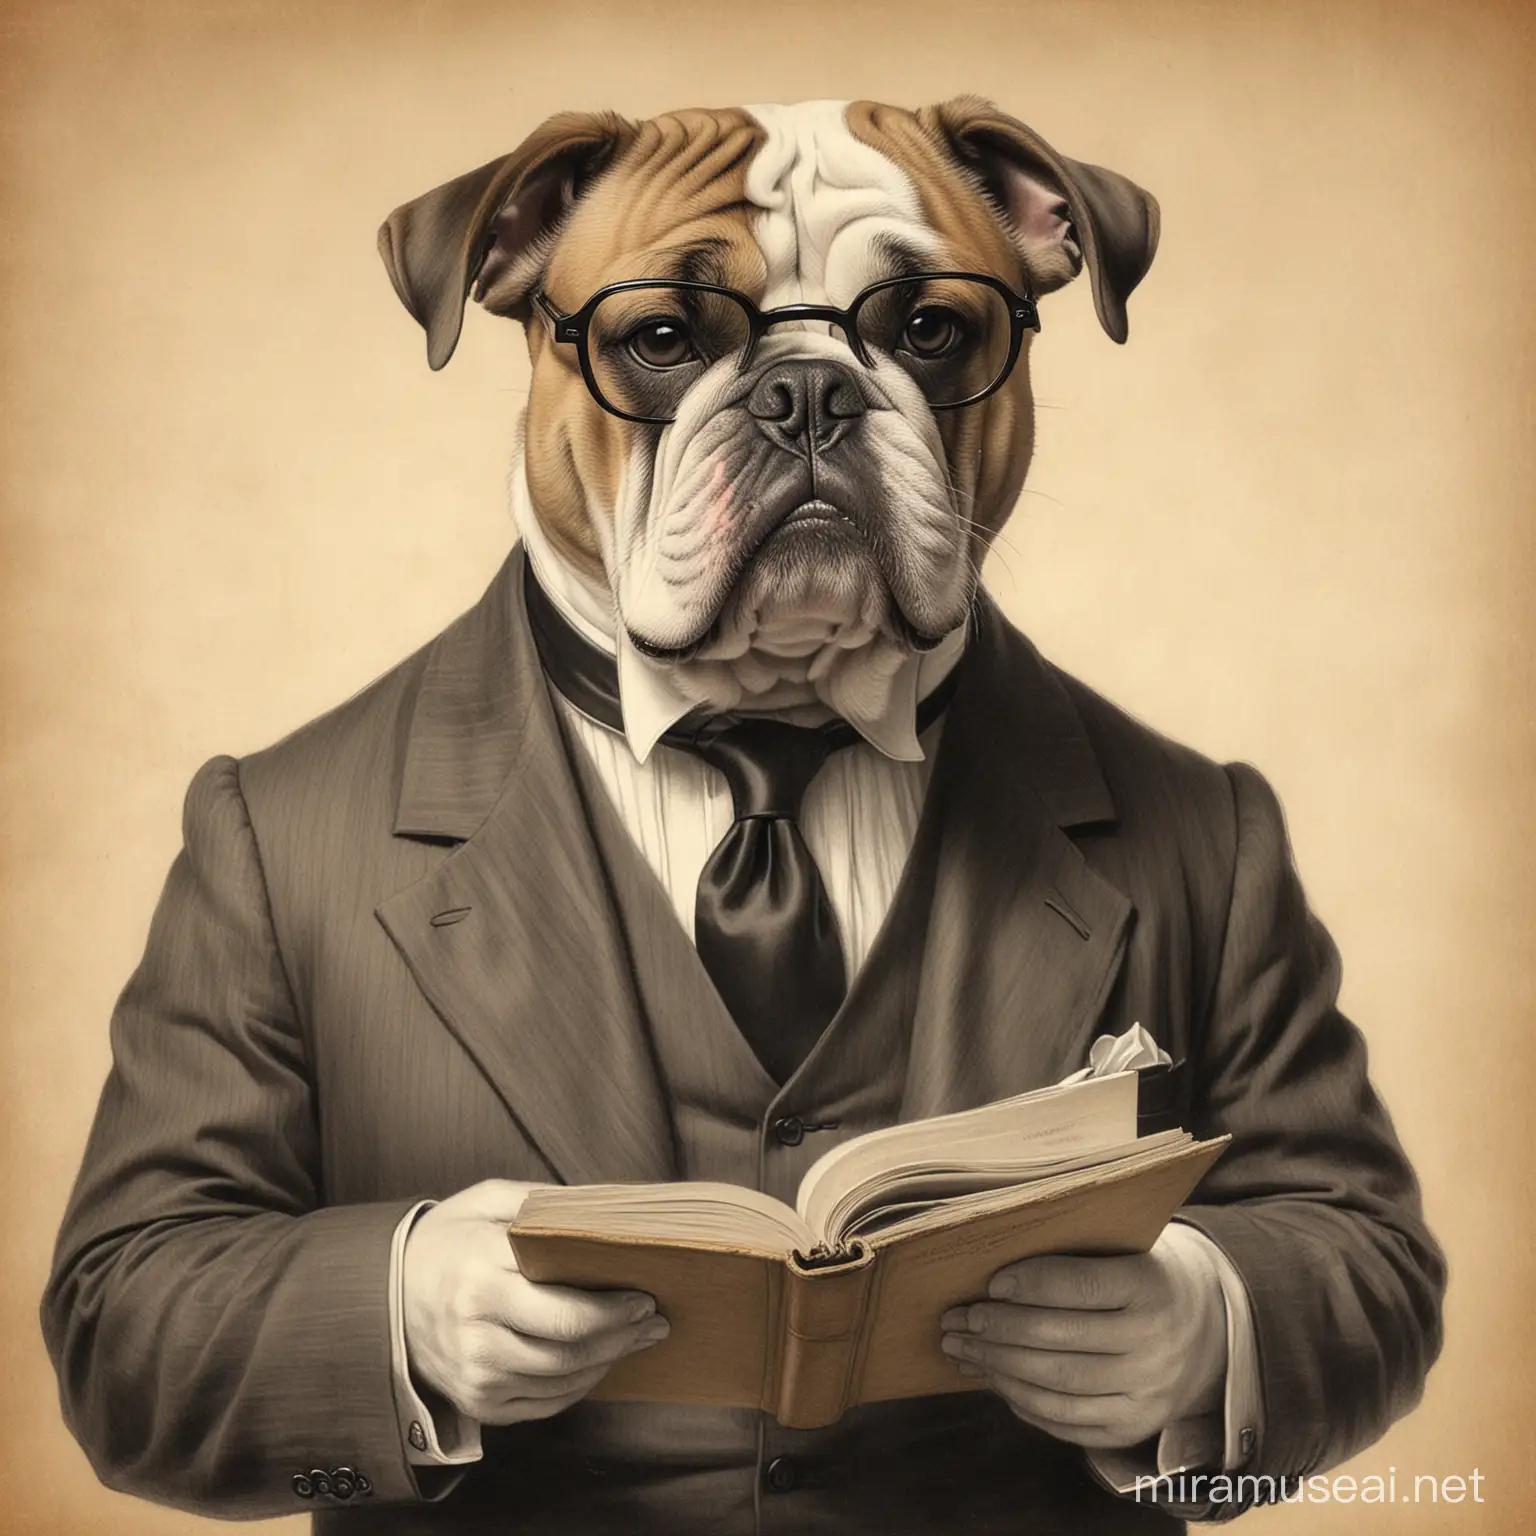 Victorian Bulldog Gentleman in Suit with Reading Glasses Sketch